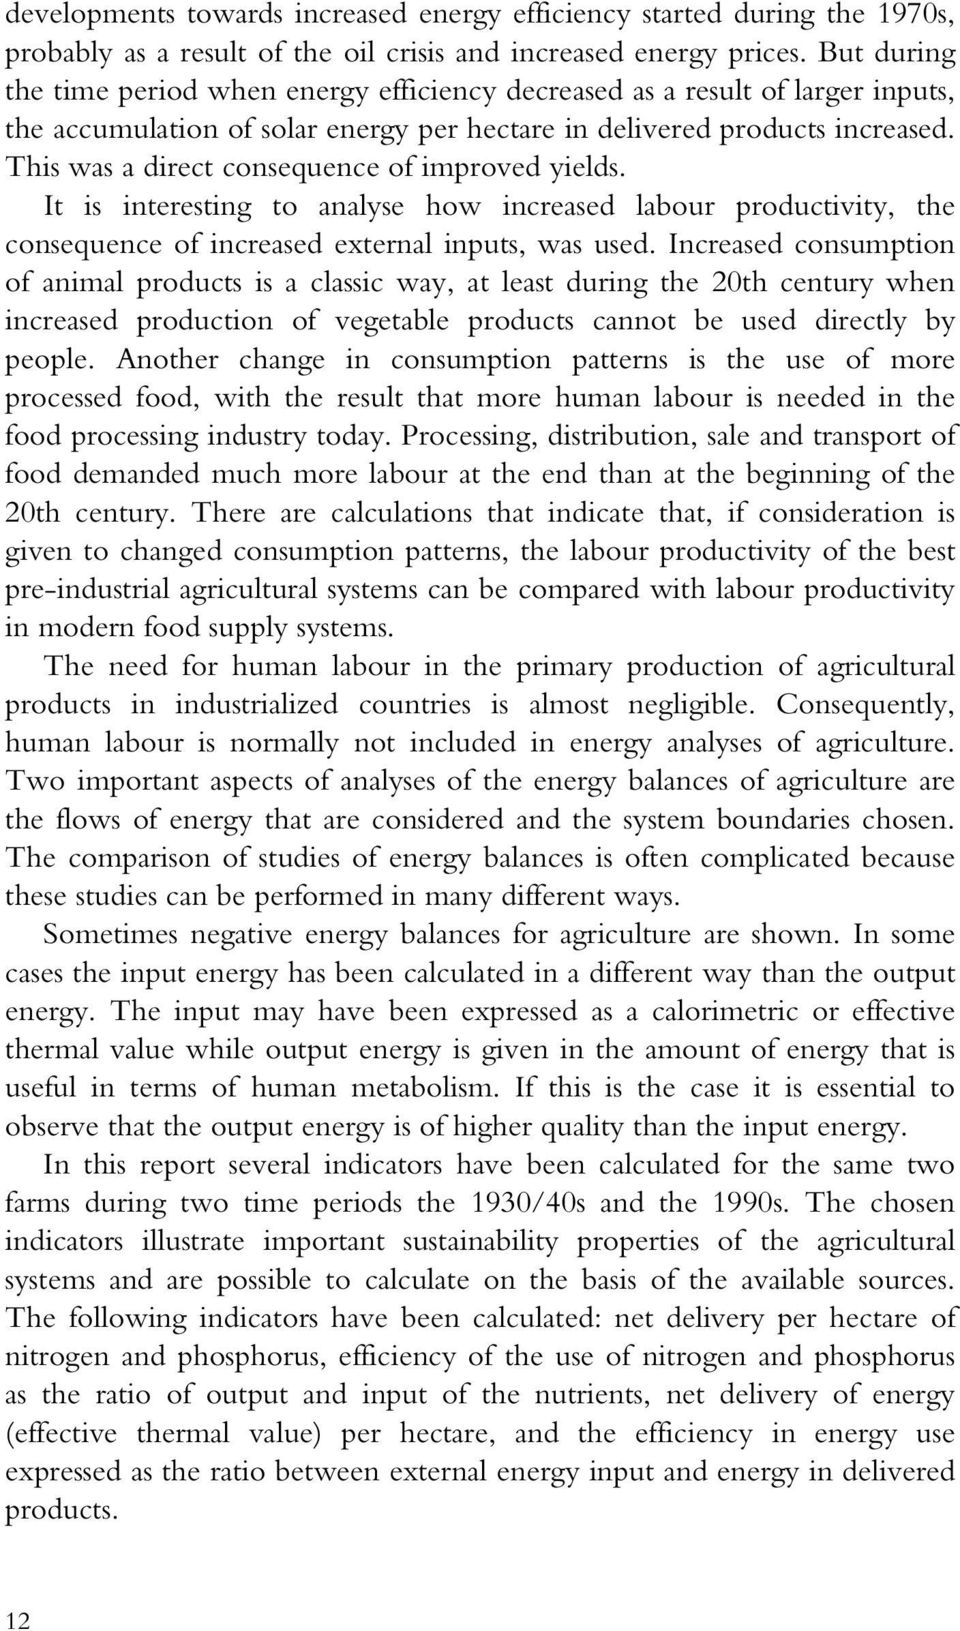 This was a direct consequence of improved yields. It is interesting to analyse how increased labour productivity, the consequence of increased external inputs, was used.